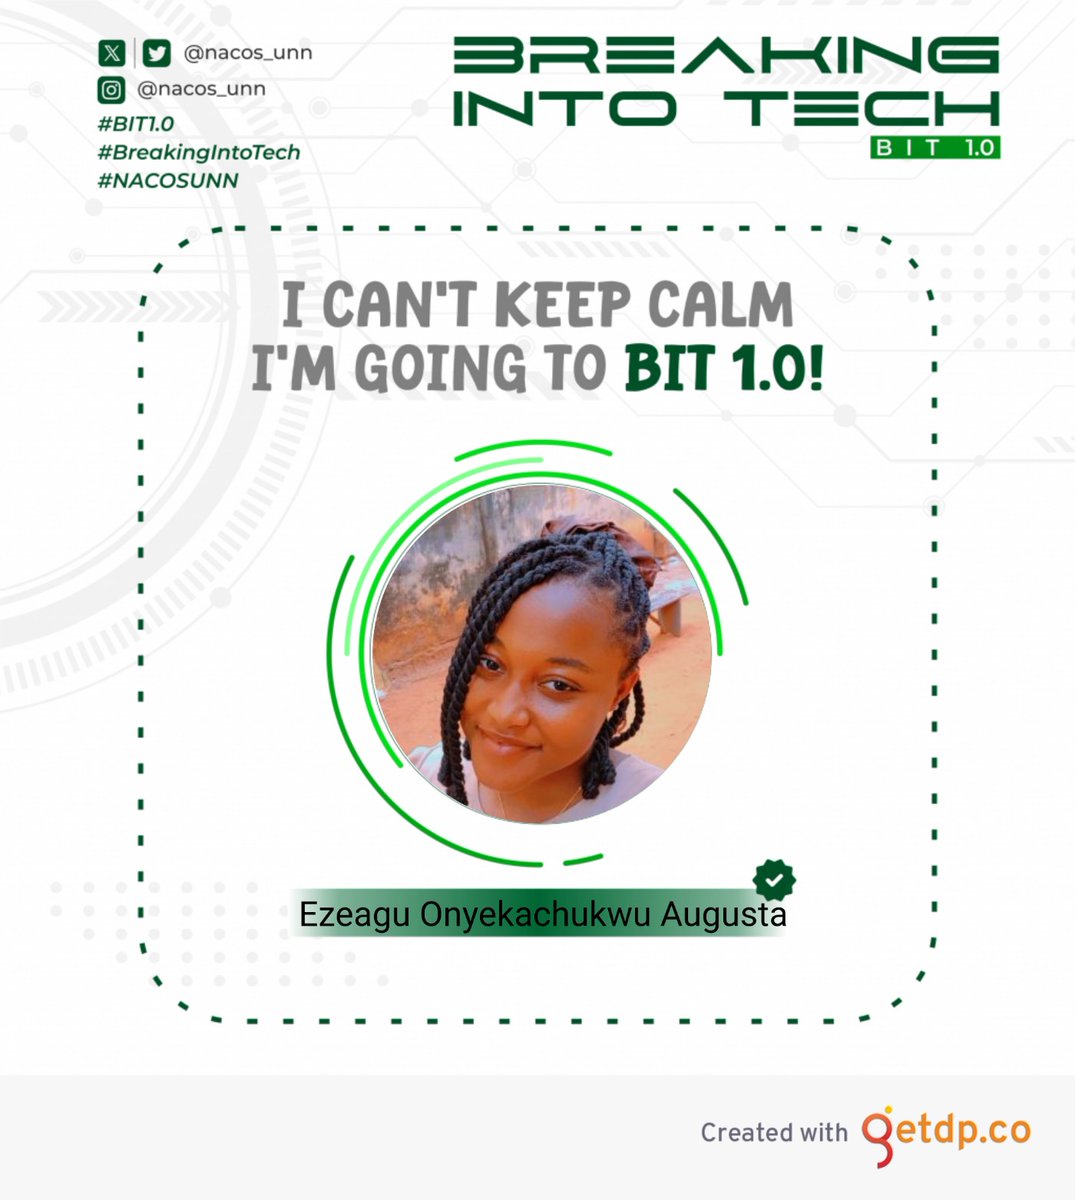 I'll be attending BIT1.0 
Hope to see you there 💯

#BIT1.0 
#BreakingIntoTech
#NACOSUNN